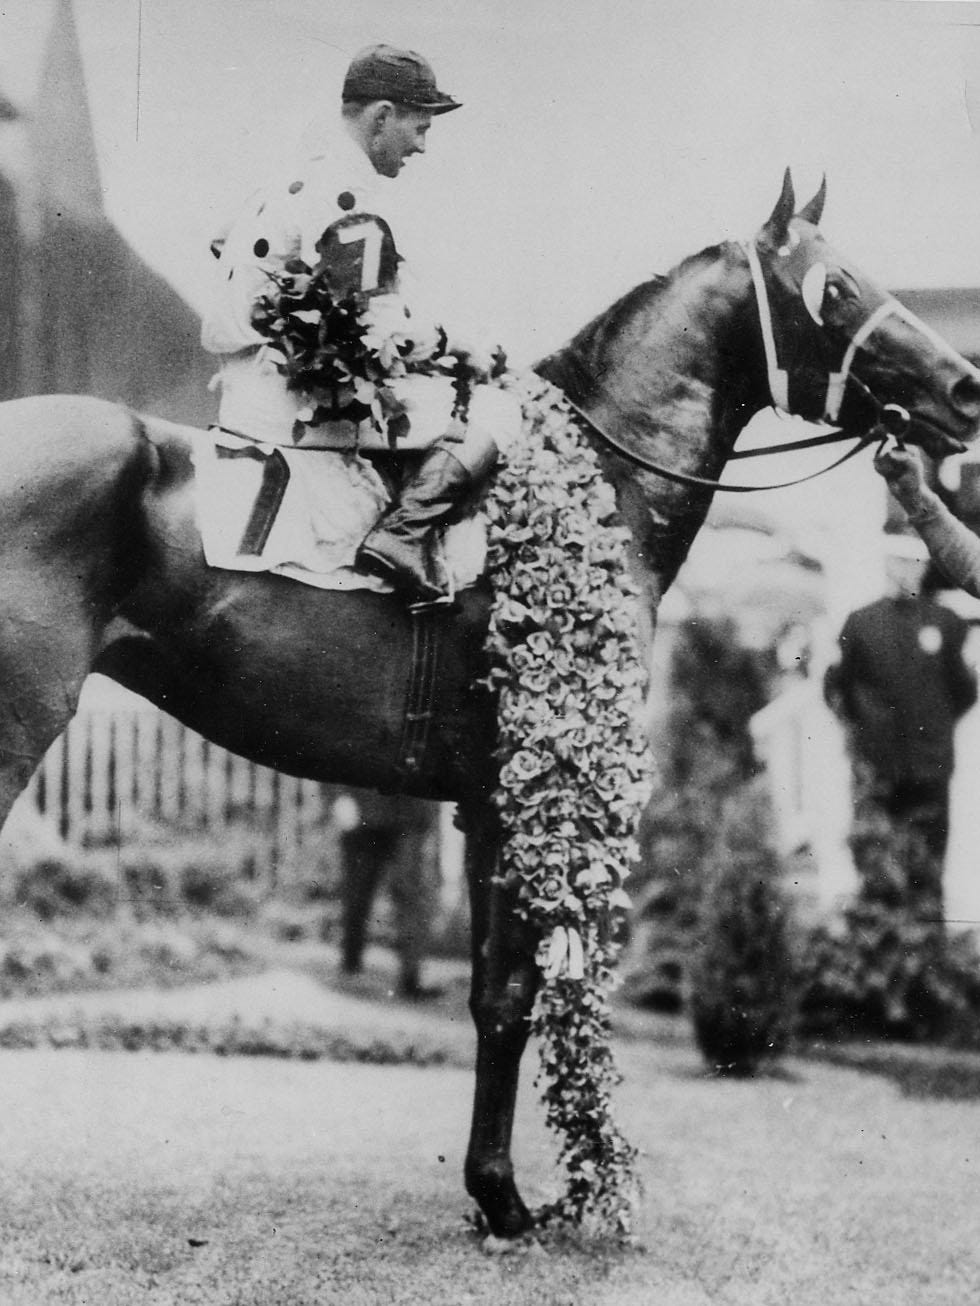 In 1930, Gallant Fox became the second Triple Crown winner. Earl Sande, who rode Gallant Fox in the Derby, was the jockey on Billy Kelly, who finished second to Sir Barton, the first Triple Crown winner, in the 1919 Derby.